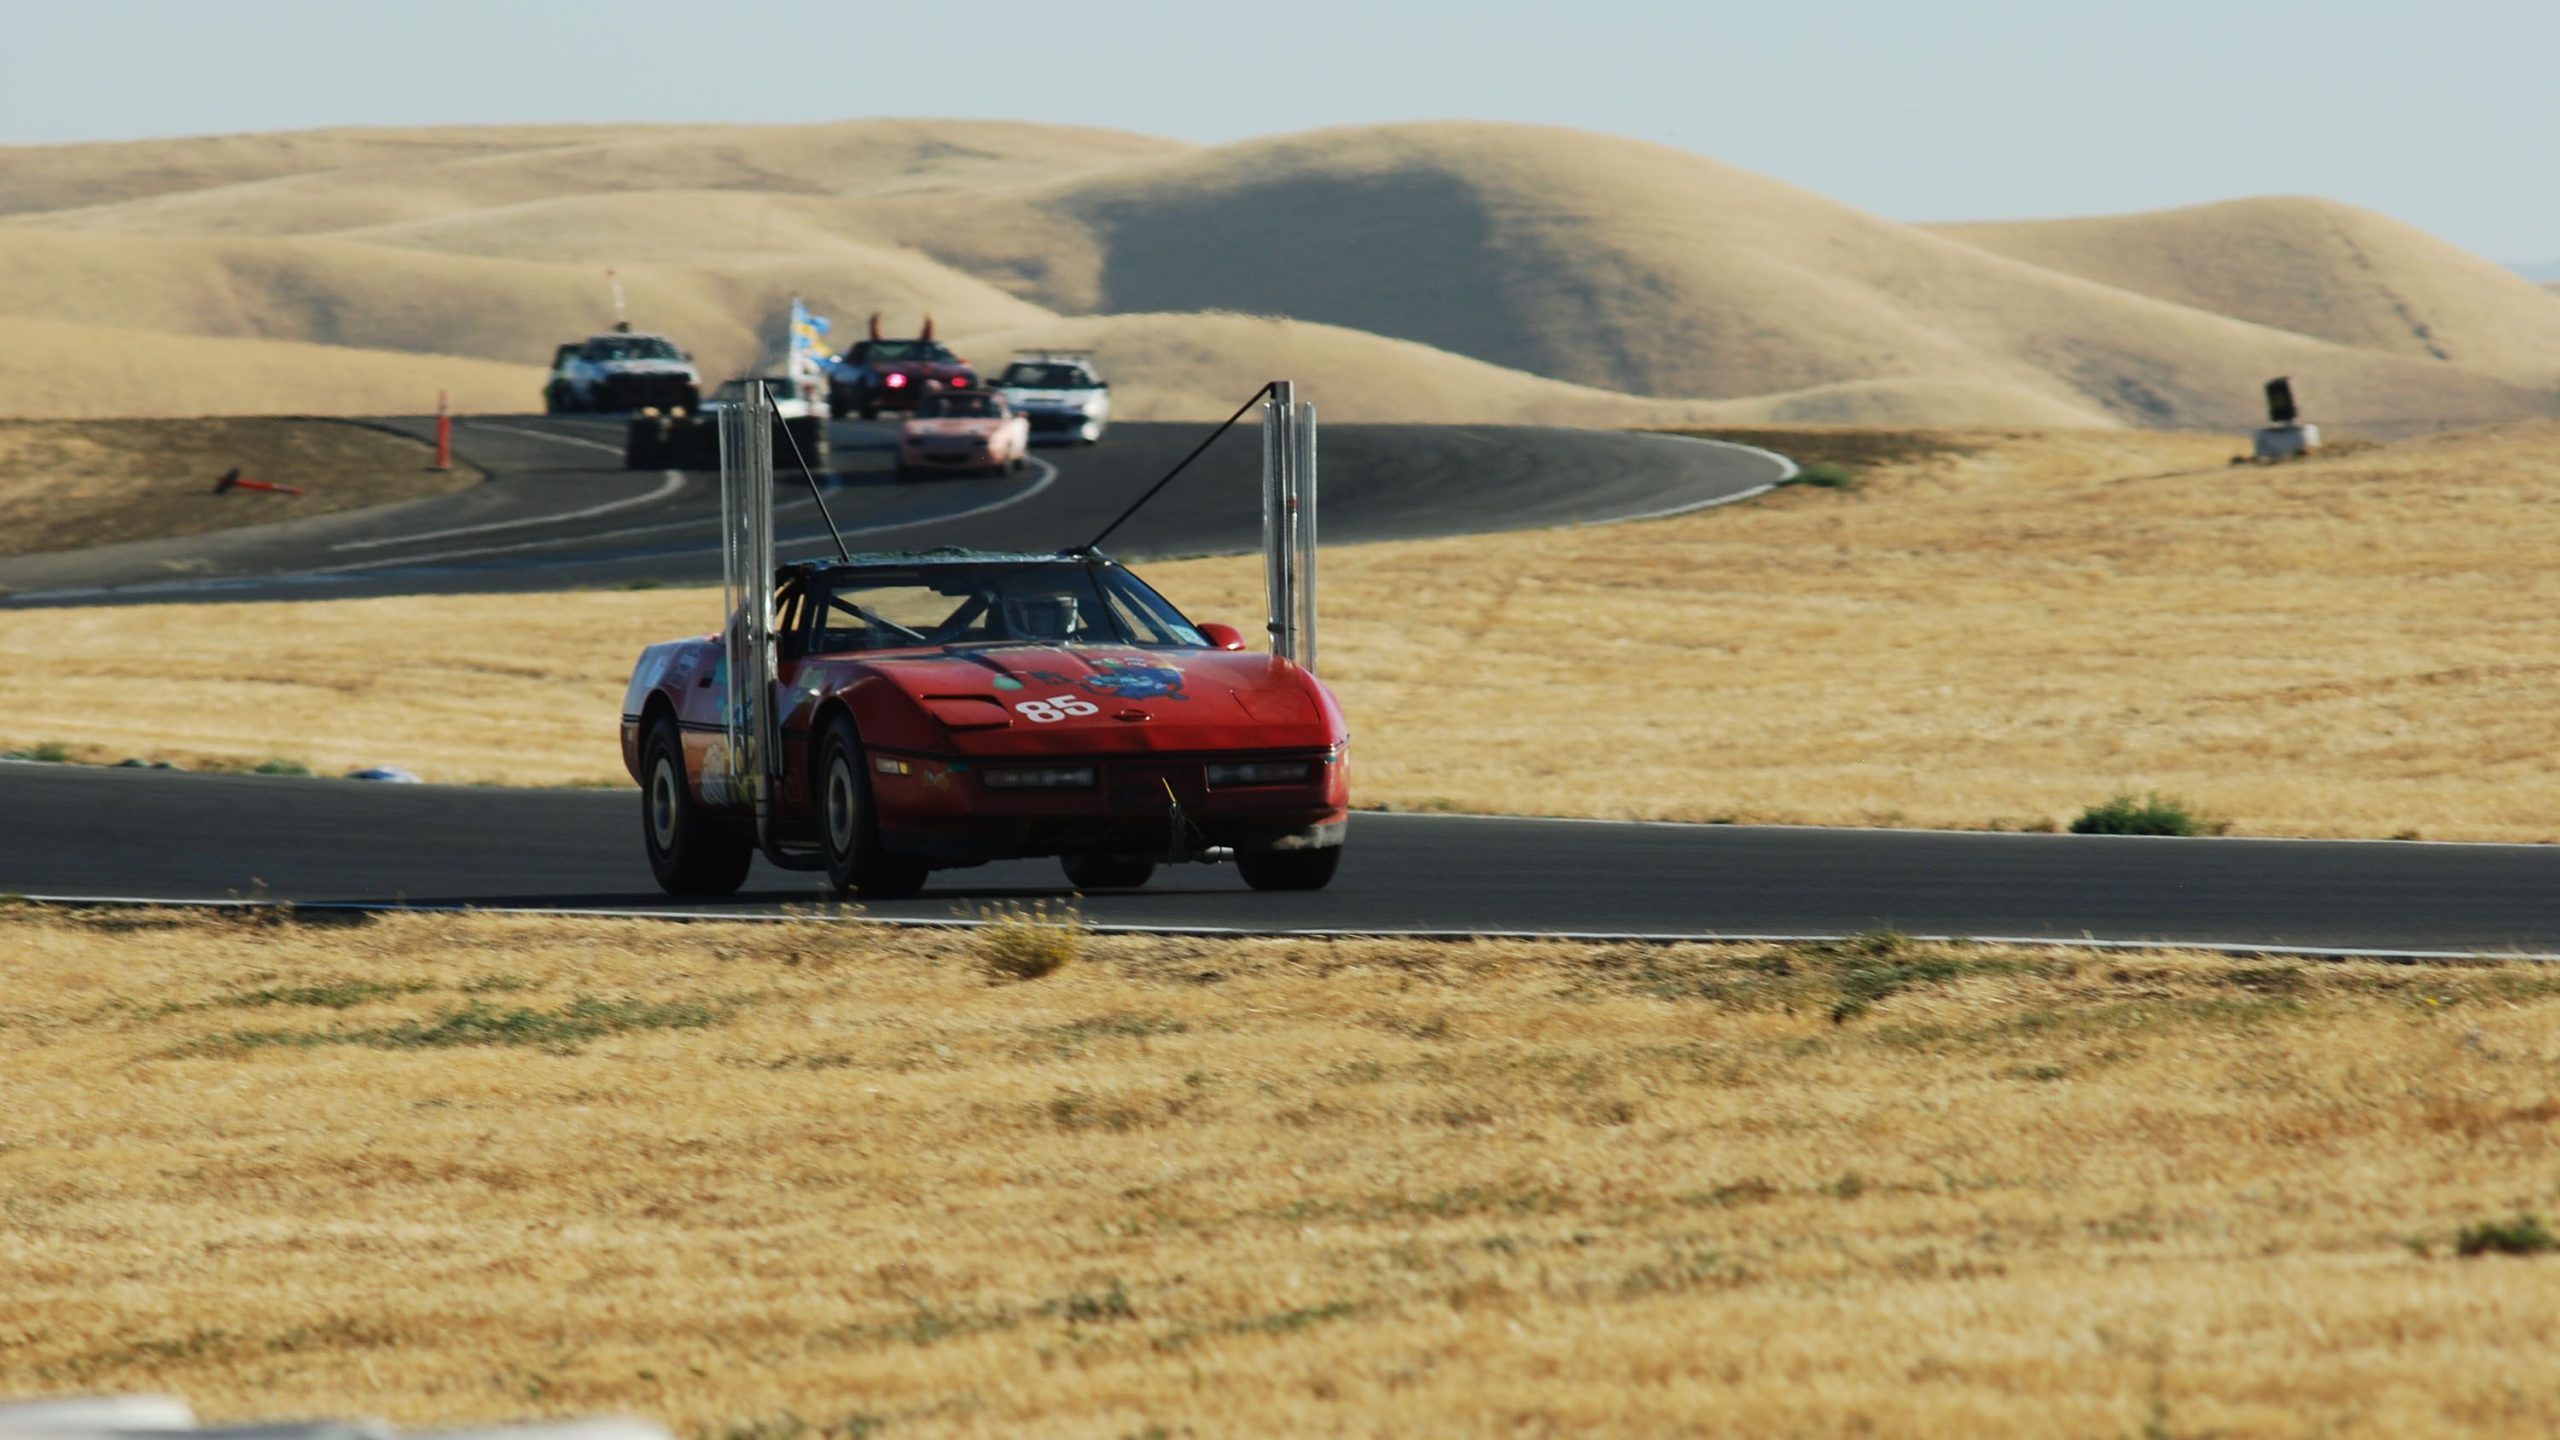 Red Chevrolet Corvette C4 powered by biodiesel on a racetrack